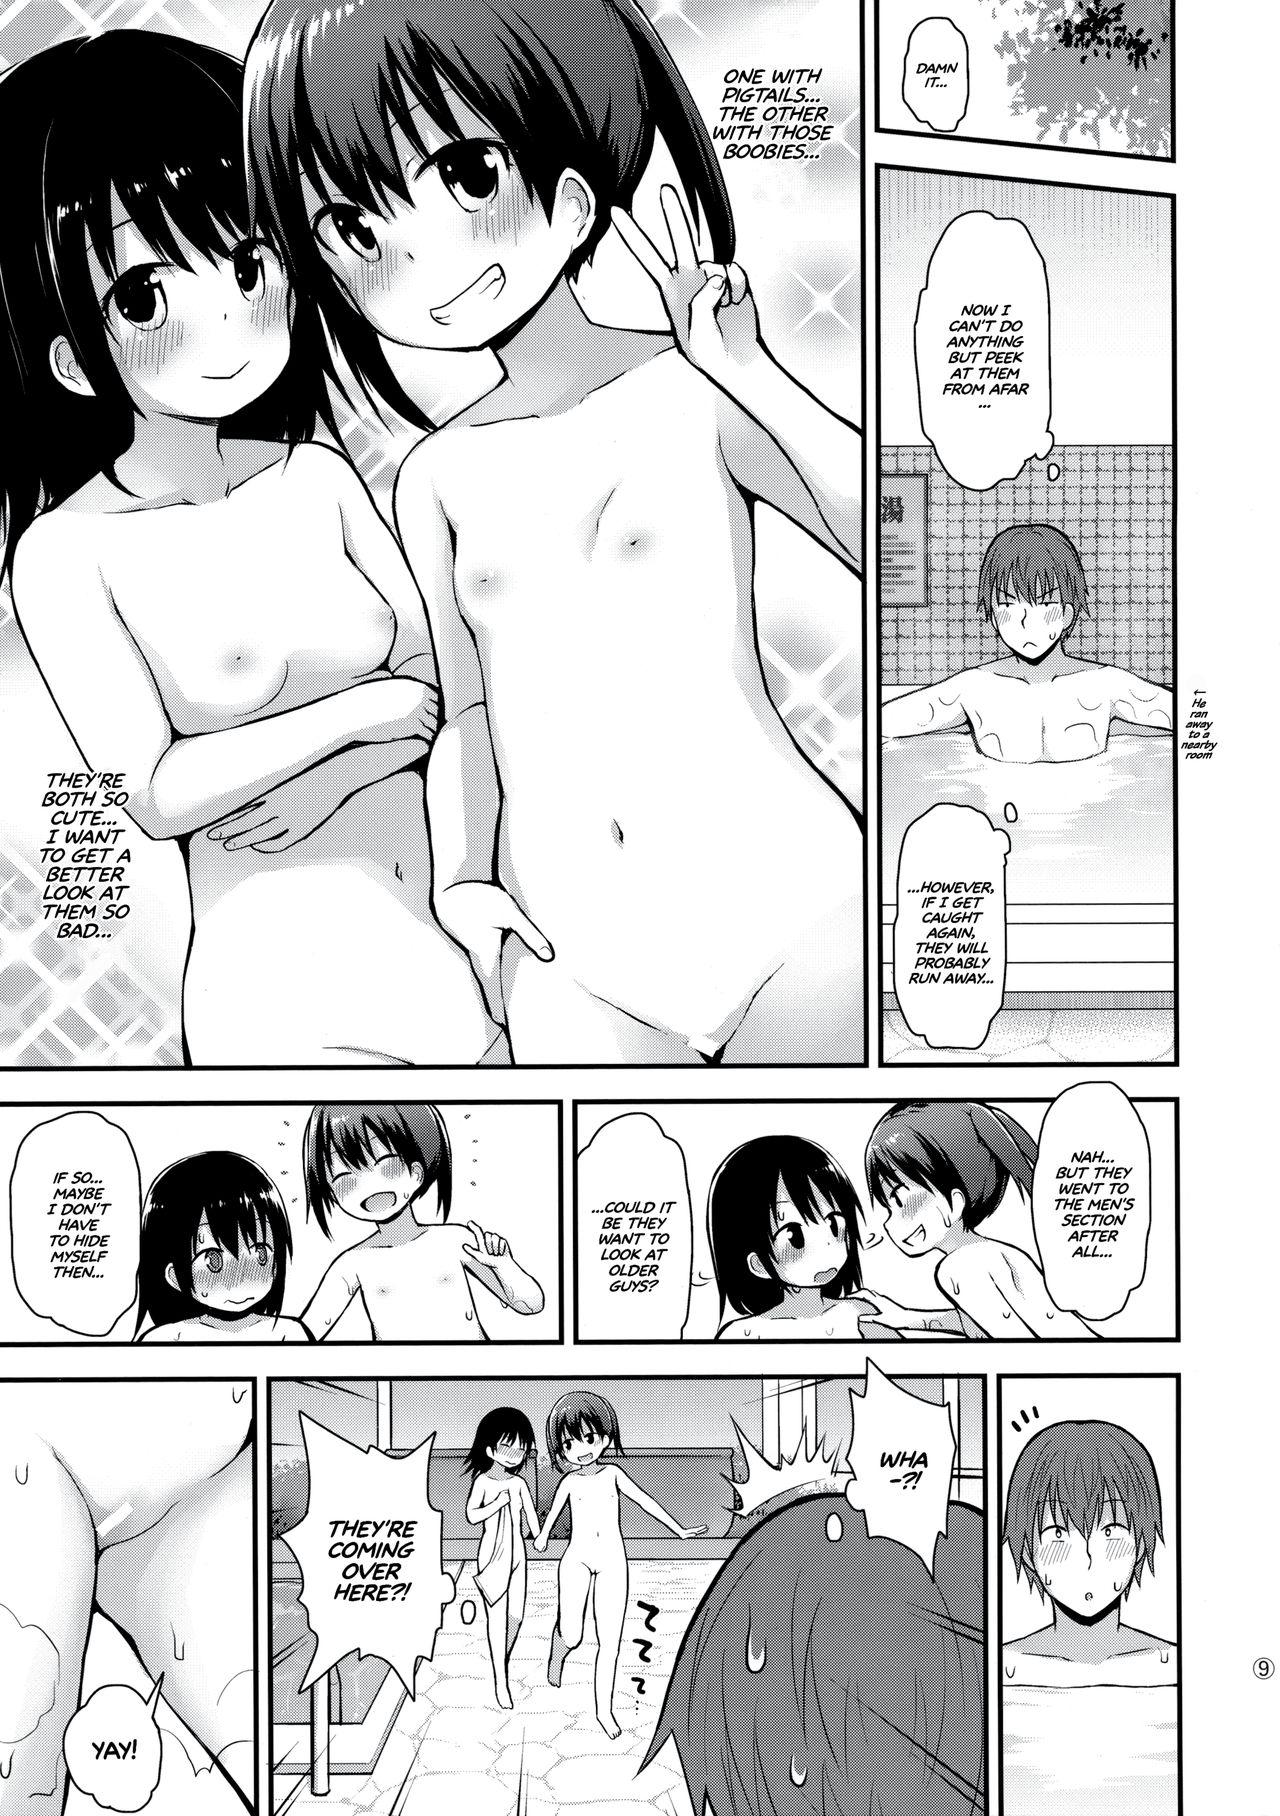 Italiano Onnanoko datte Otokoyu ni Hairitai | They may just be little girls, but they still want to enter the men's bath! - Original Topless - Page 8